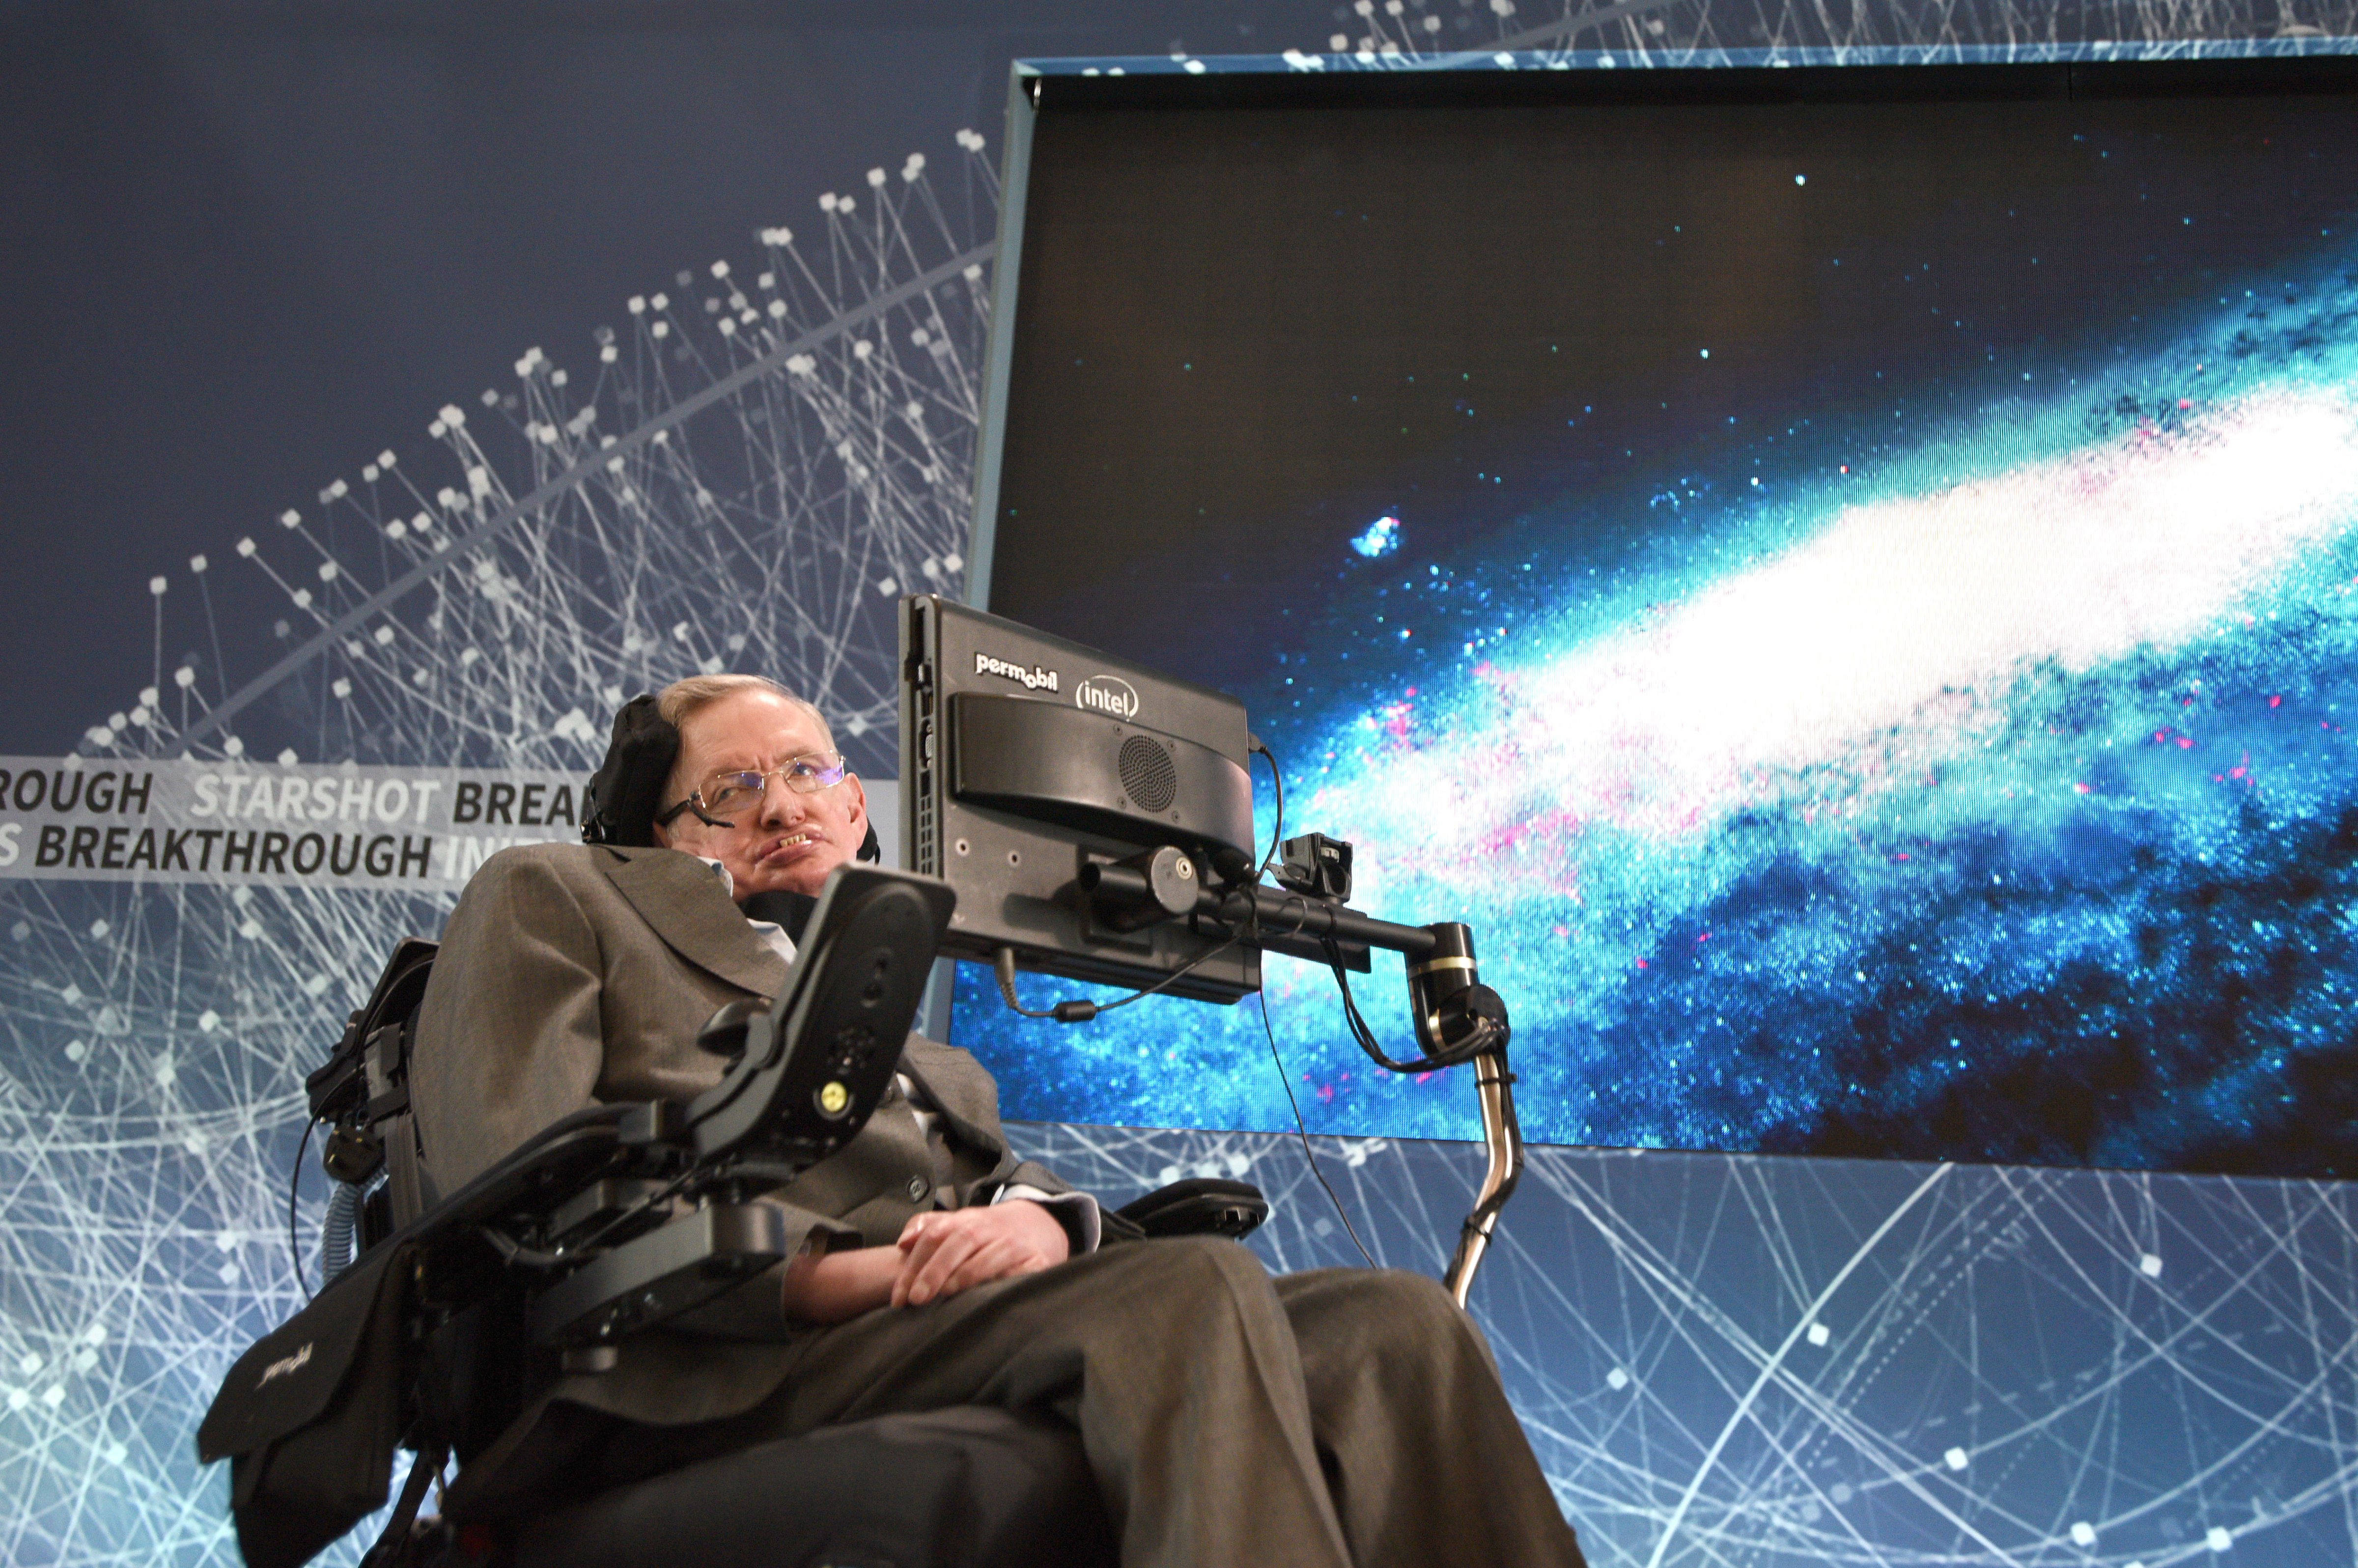 Stephen Hawking at One World Observatory on April 12, 2016 in New York City. (Bryan Bedder—Getty Images for Breakthrough Prize Foundation)